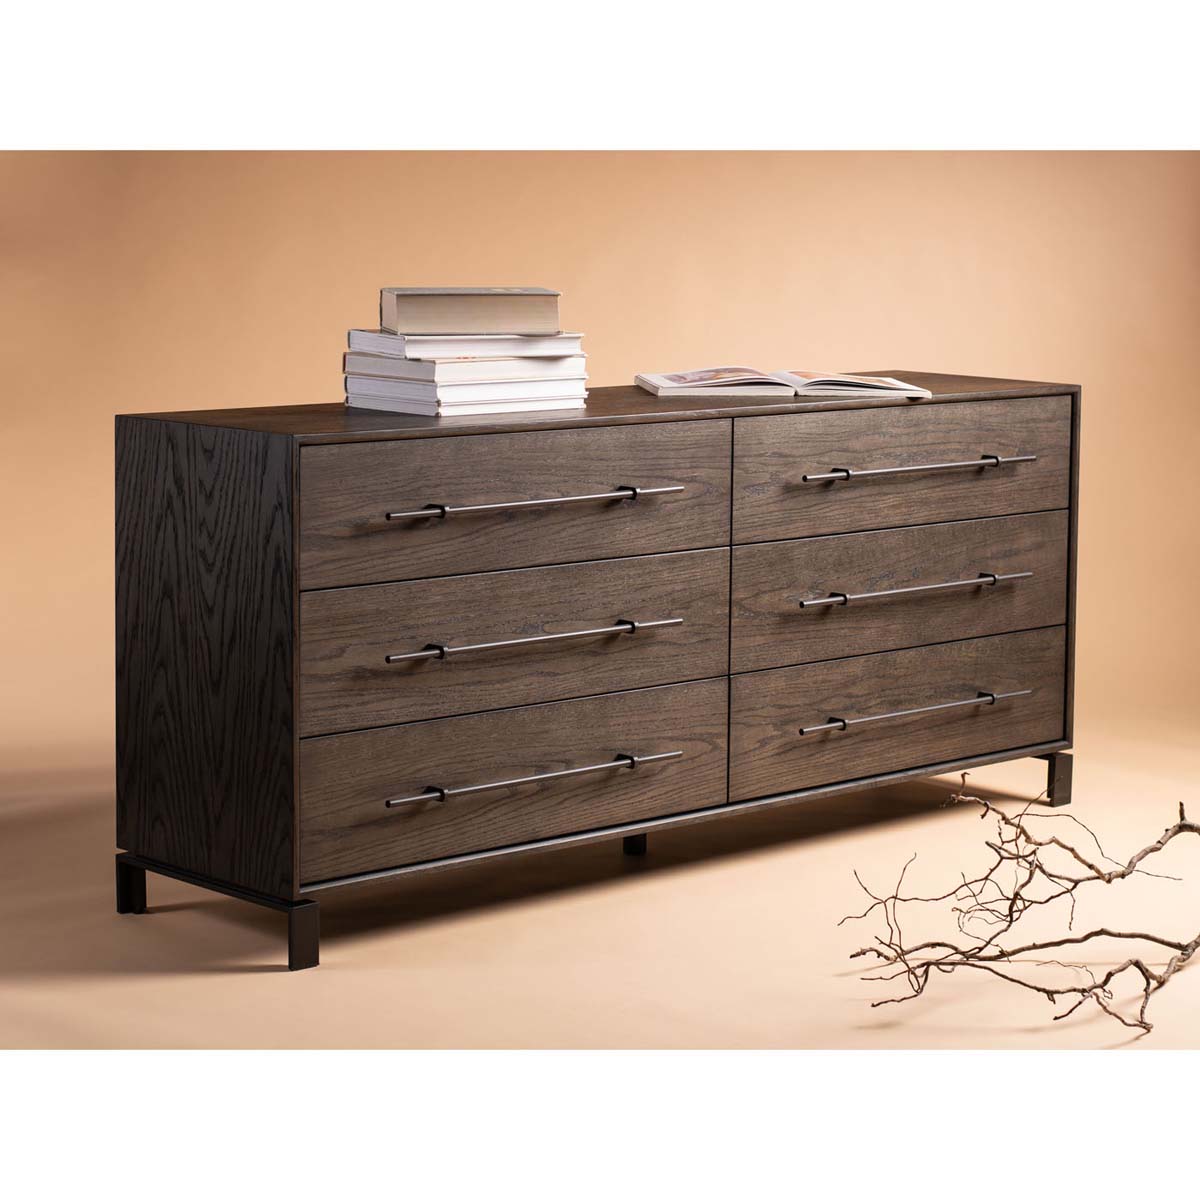 Safavieh Couture Simmons 6 Drawer Wood Dresser